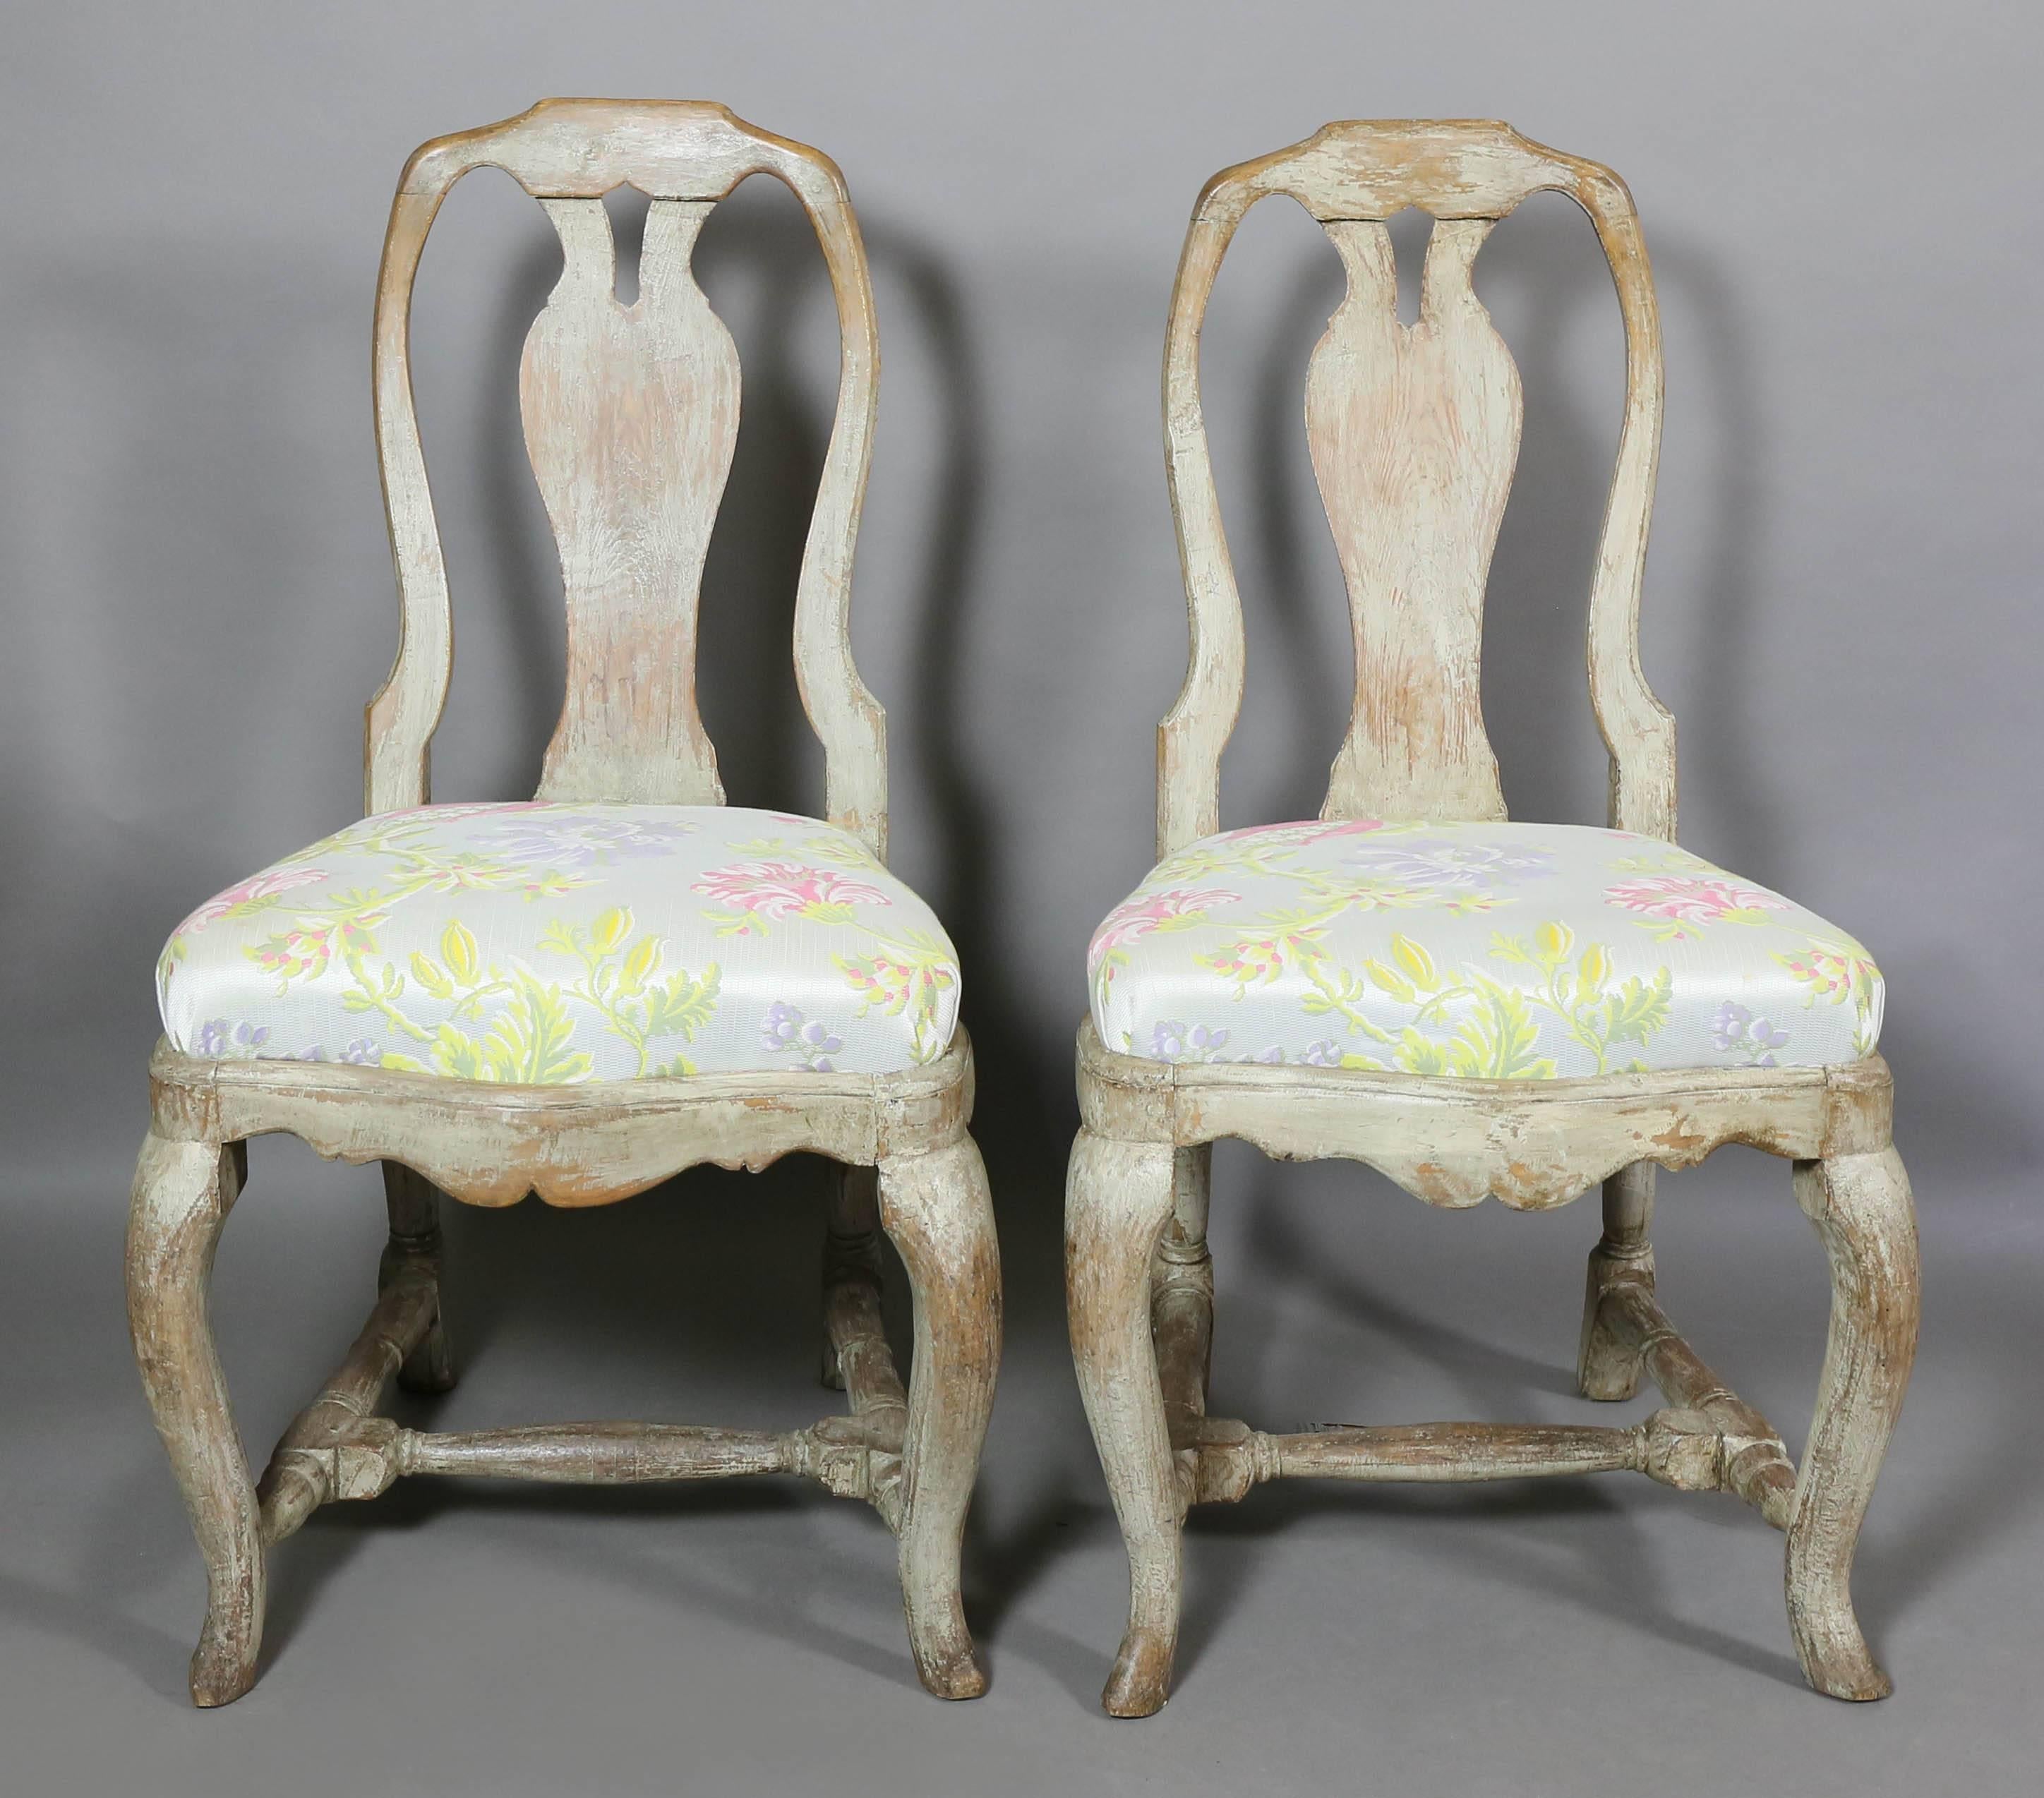 Each with an arched back with central vasiform splat, serpentine silk drop in upholstered seat raised on cabriole legs with turned H form stretchers, pad feet.